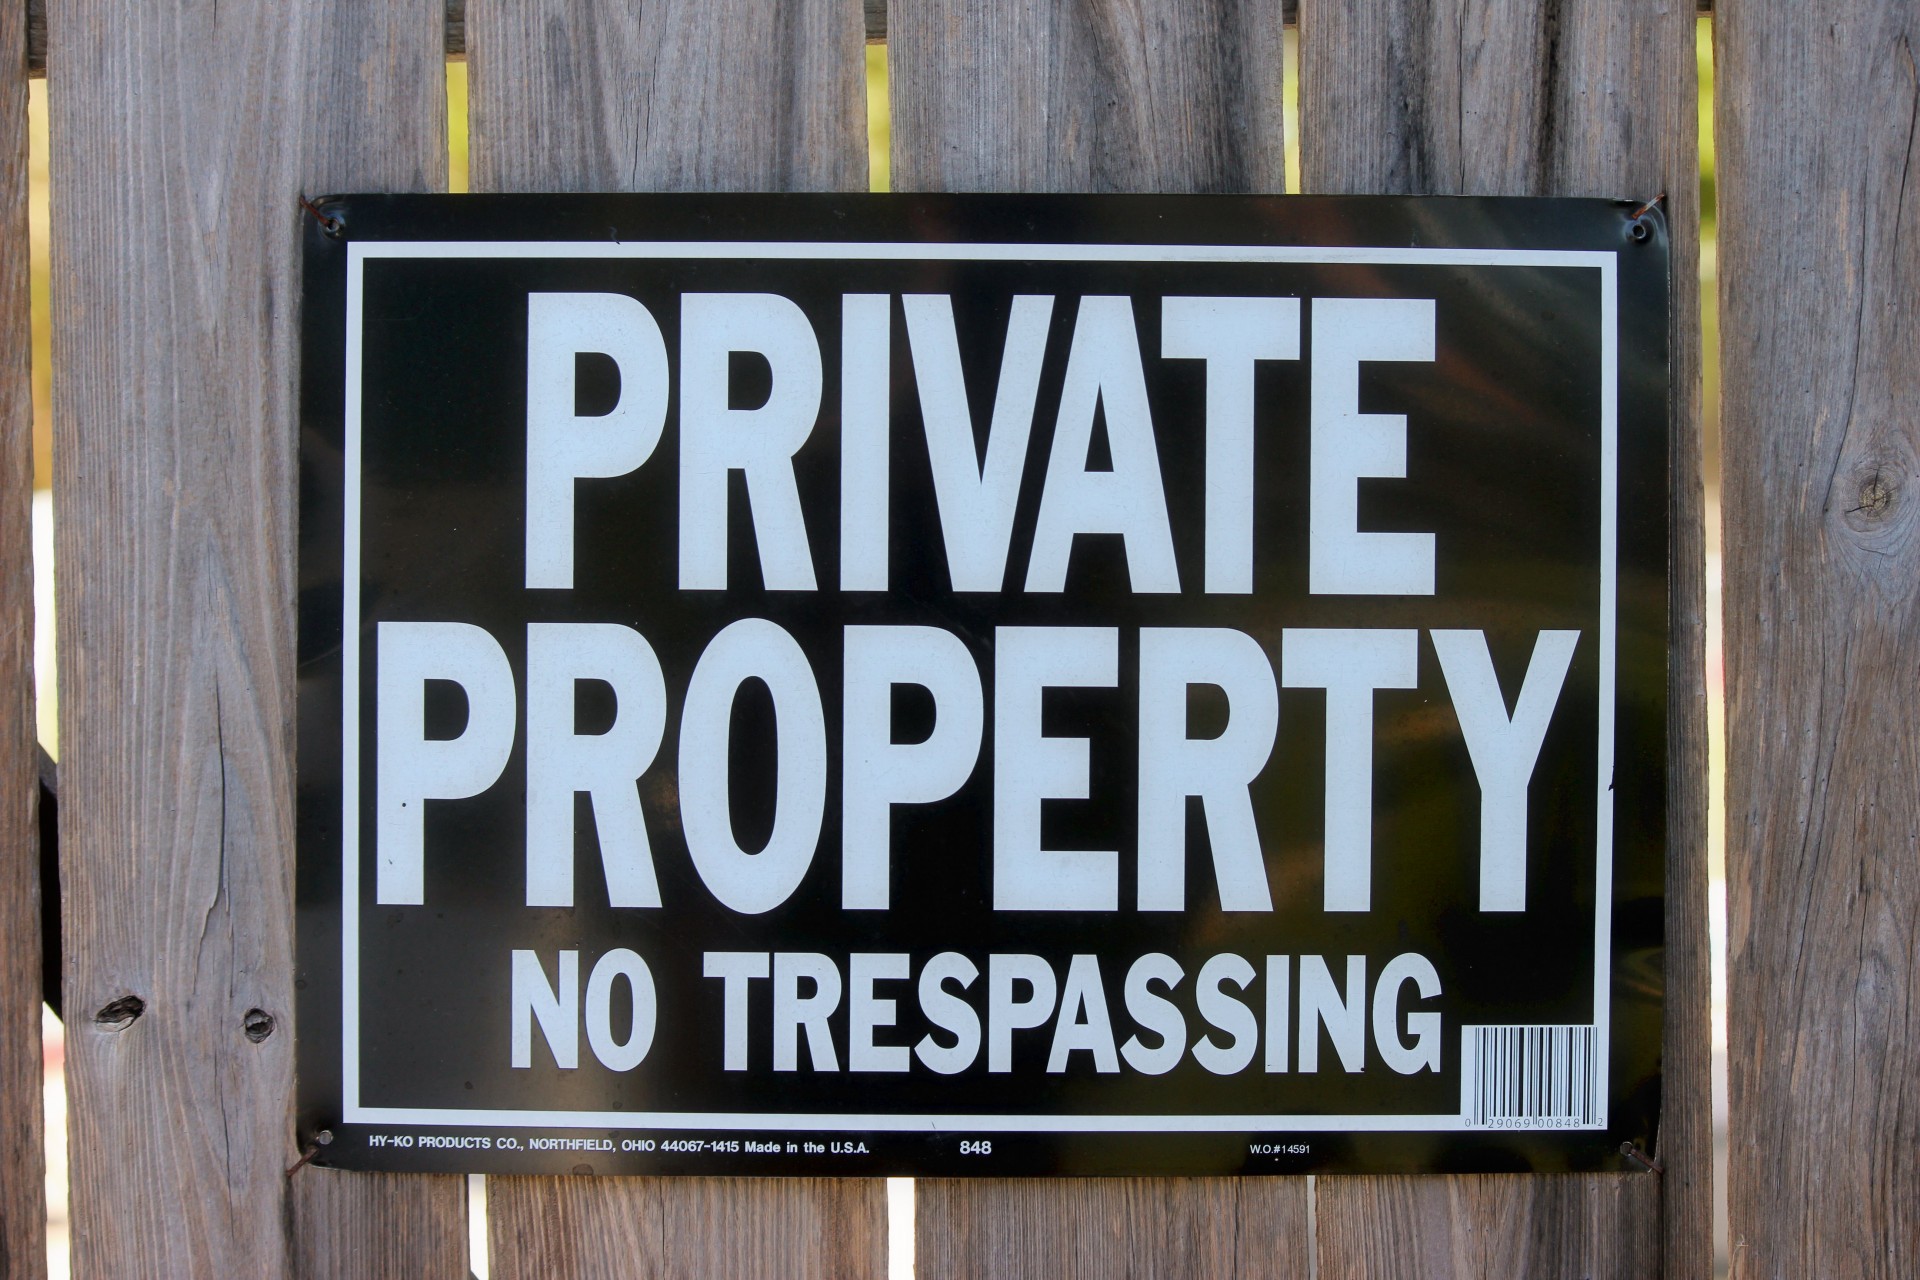 private-property-sign